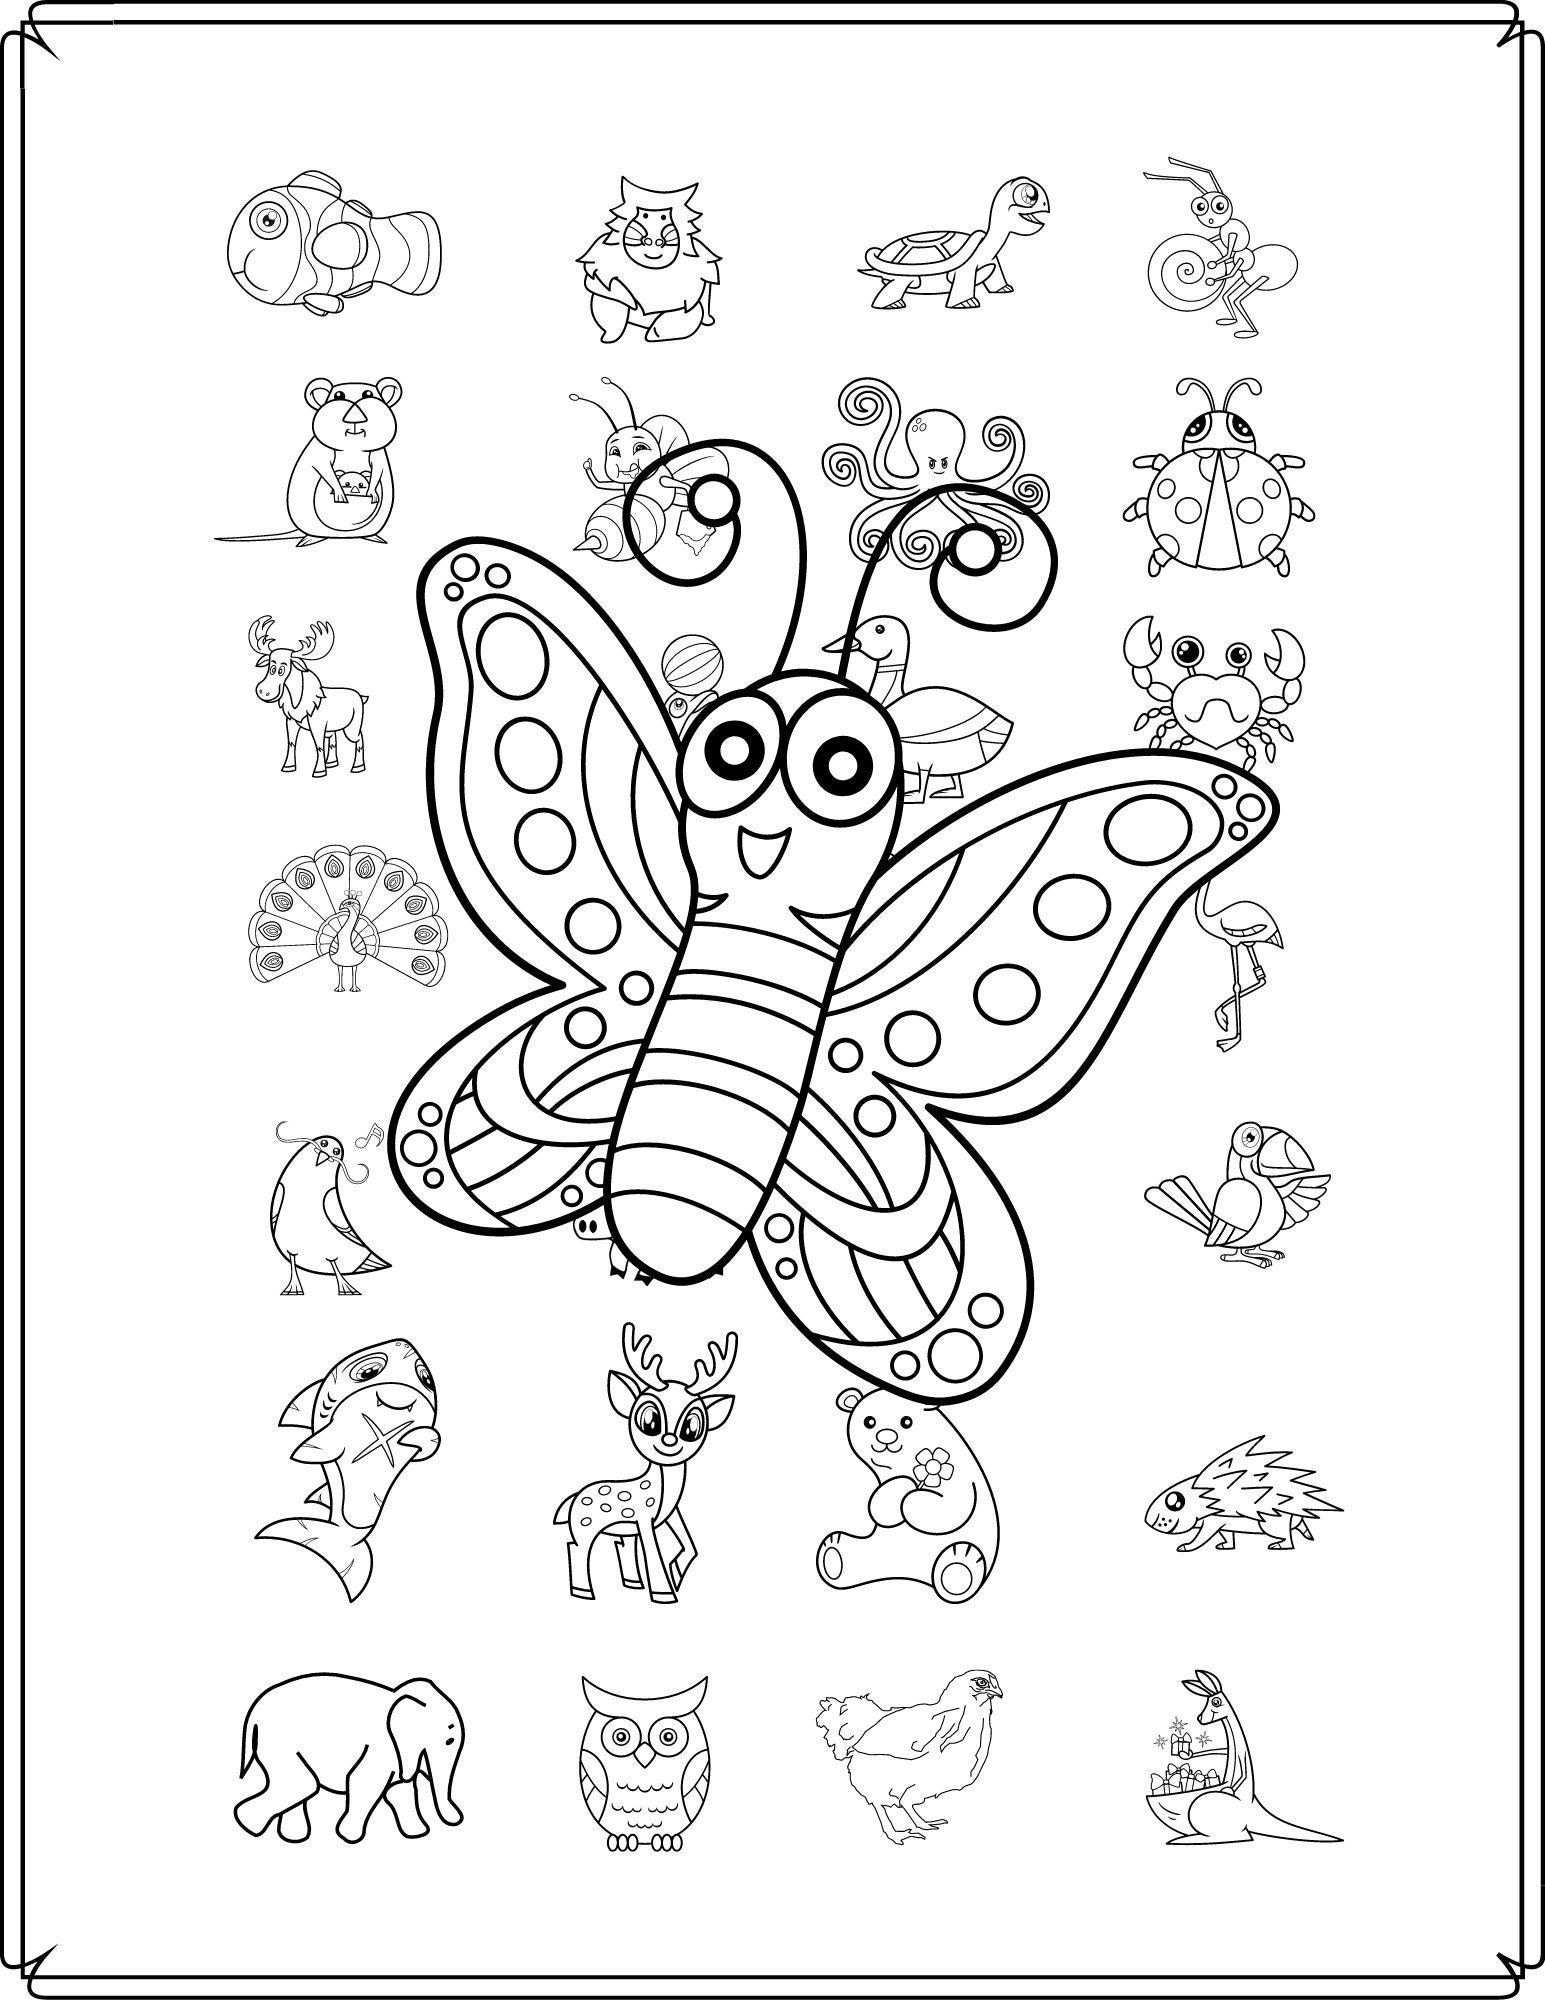 Animals coloring books for kids ages 2-4: Coloring Book, Relax Design for  Artists with fun and easy design for Children kids Preschool (Paperback)